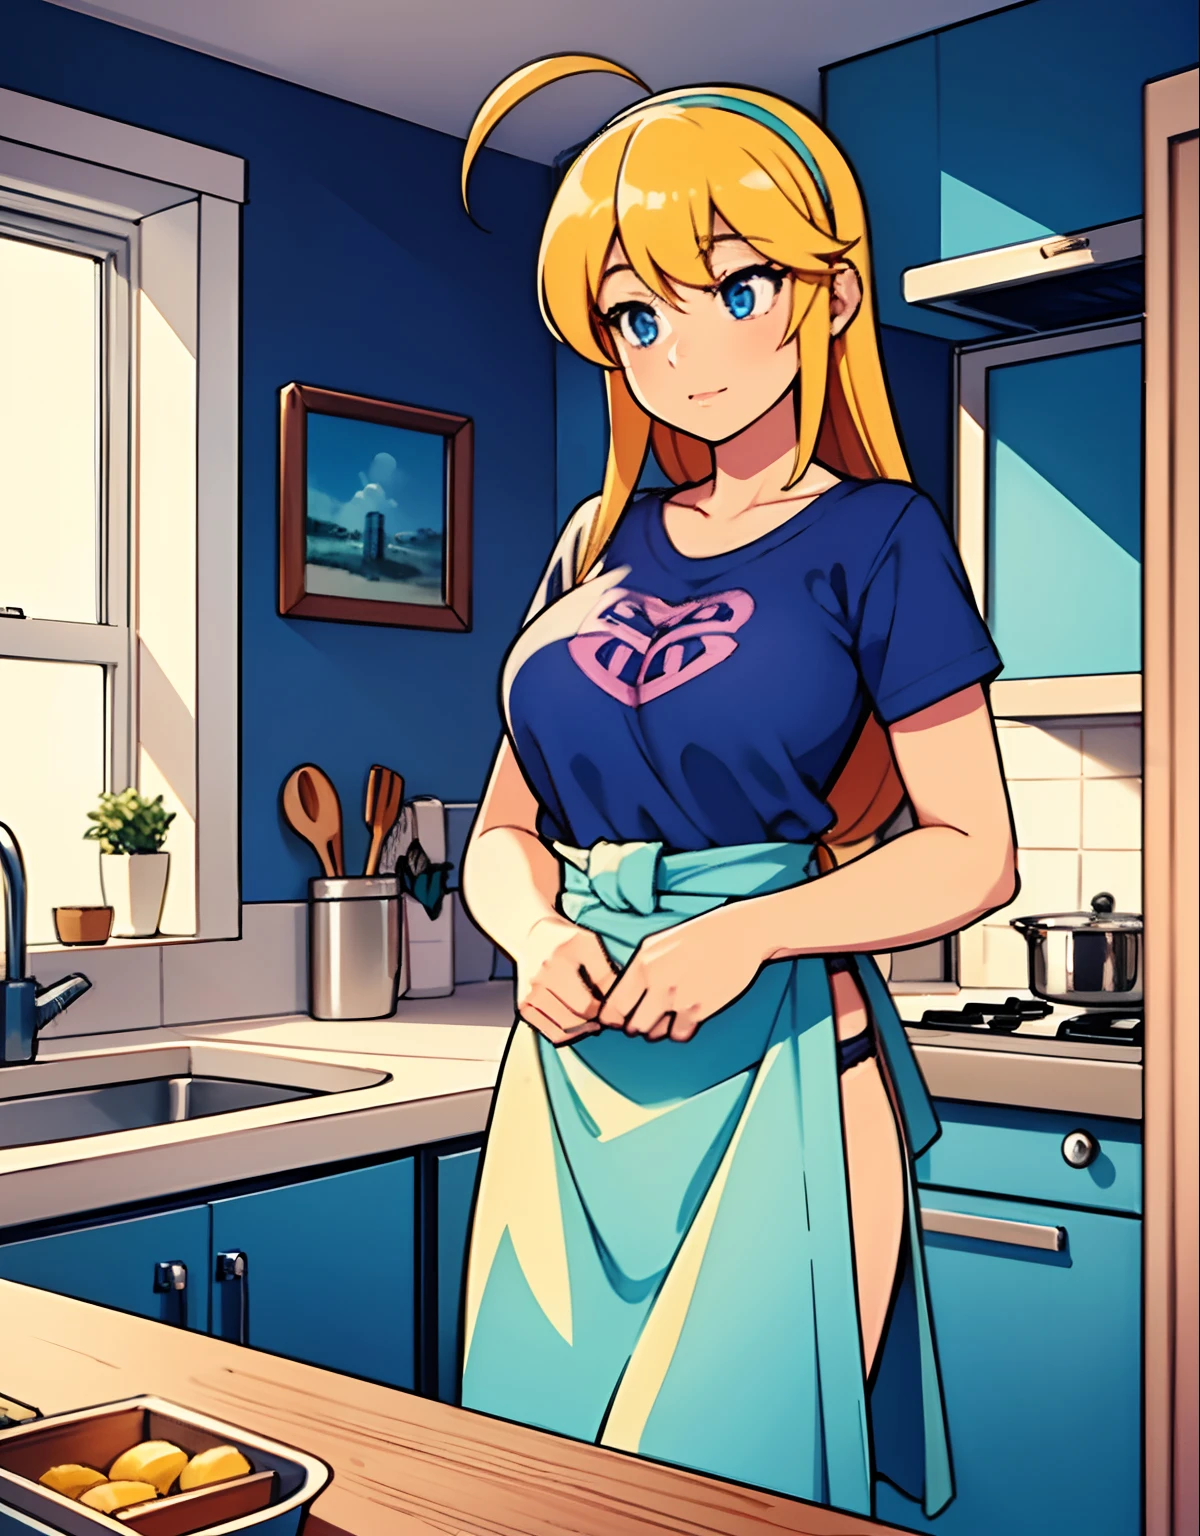 A robot housewife stands in the center of the scene. She has long blonde hair cascading down her shoulders and stunning blue eyes that mesmerize anyone who gazes into them. Her eyes light up with a vibrant glow, adding a hint of futuristic technology to her appearance. The robot housewife wears a pink t-shirt that complements her skin tone and a pair of blue jeans that fit her perfectly.

To complete her outfit, she adds a pink hairband adorned with an expressive ahoge, which adds a touch of playfulness to her character. As she goes about her daily tasks, she wears a green apron that ties neatly around her waist. The apron is slightly worn, suggesting a touch of nostalgia and memories created over time.

In the background, the scene is set in a cozy and neatly organized kitchen. Colorful utensils hang from hooks on the wall, adding a vibrant touch to the space. A wooden cutting board is laid on the countertop, with a bowl of fresh fruits waiting to be prepared. The sunlight streams through the window, casting warm rays on the scene, while soft kitchen lighting illuminates the robot housewife's face.

The overall image quality is of the highest caliber, embracing 4K resolution and showcasing ultra-detailed rendering. The vibrant colors of the scene bring a lively atmosphere, and the realistic depiction captures every intricate detail. The blending of various art styles, including a hint of anime influence, creates a unique and captivating visual storytelling experience.

The color palette is dominated by shades of pink and blue, creating a harmonious and soothing ambiance. The lighting emphasizes the warmth and coziness of the kitchen, with soft shadows casting an ethereal atmosphere.

Without a doubt, this artwork captures the essence of a modern robot housewife, combining technology, nostalgia, and a touch of whimsy. The attention to detail in her appearance and the surrounding environment breathe life into the painting, making it a masterpiece that blends reality